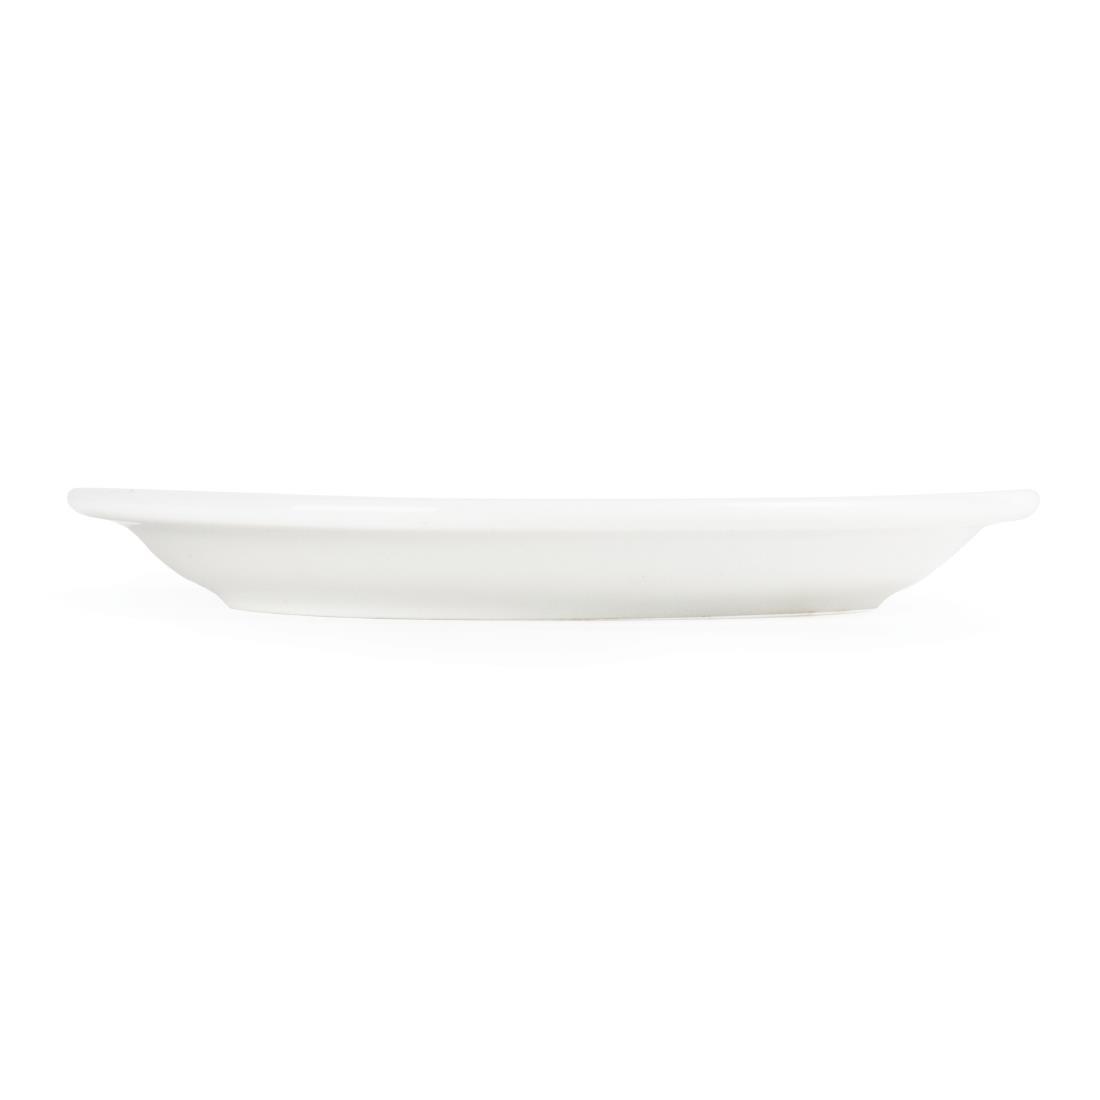 Olympia Whiteware Narrow Rimmed Plates 150mm (Pack of 12) - CB486  - 3